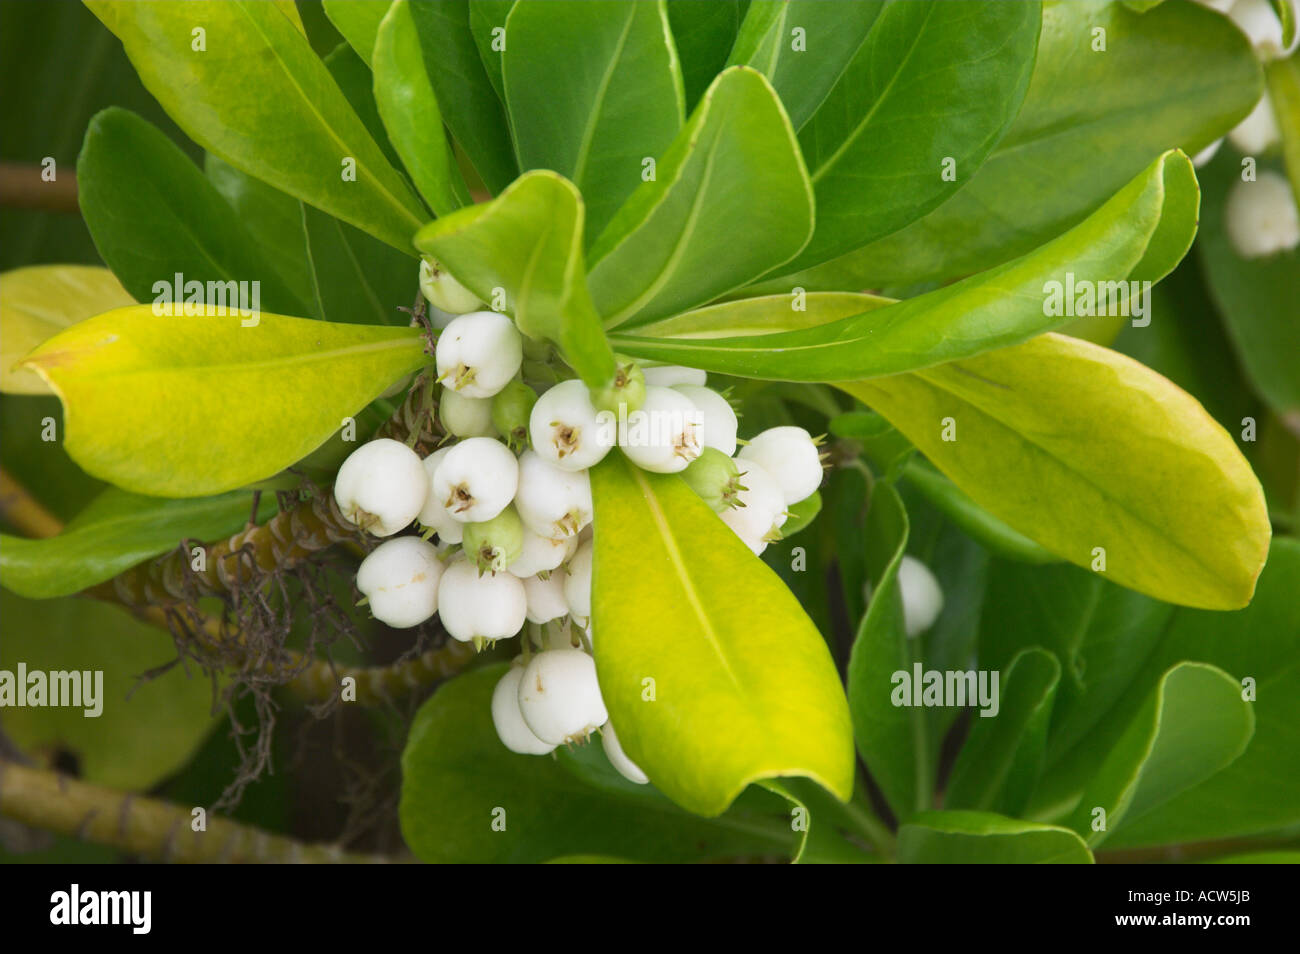 Clusters of white berries and foliage of the Purslane plant or Sesuvium portulacastrum on Half Moon Cay Bahamas Stock Photo